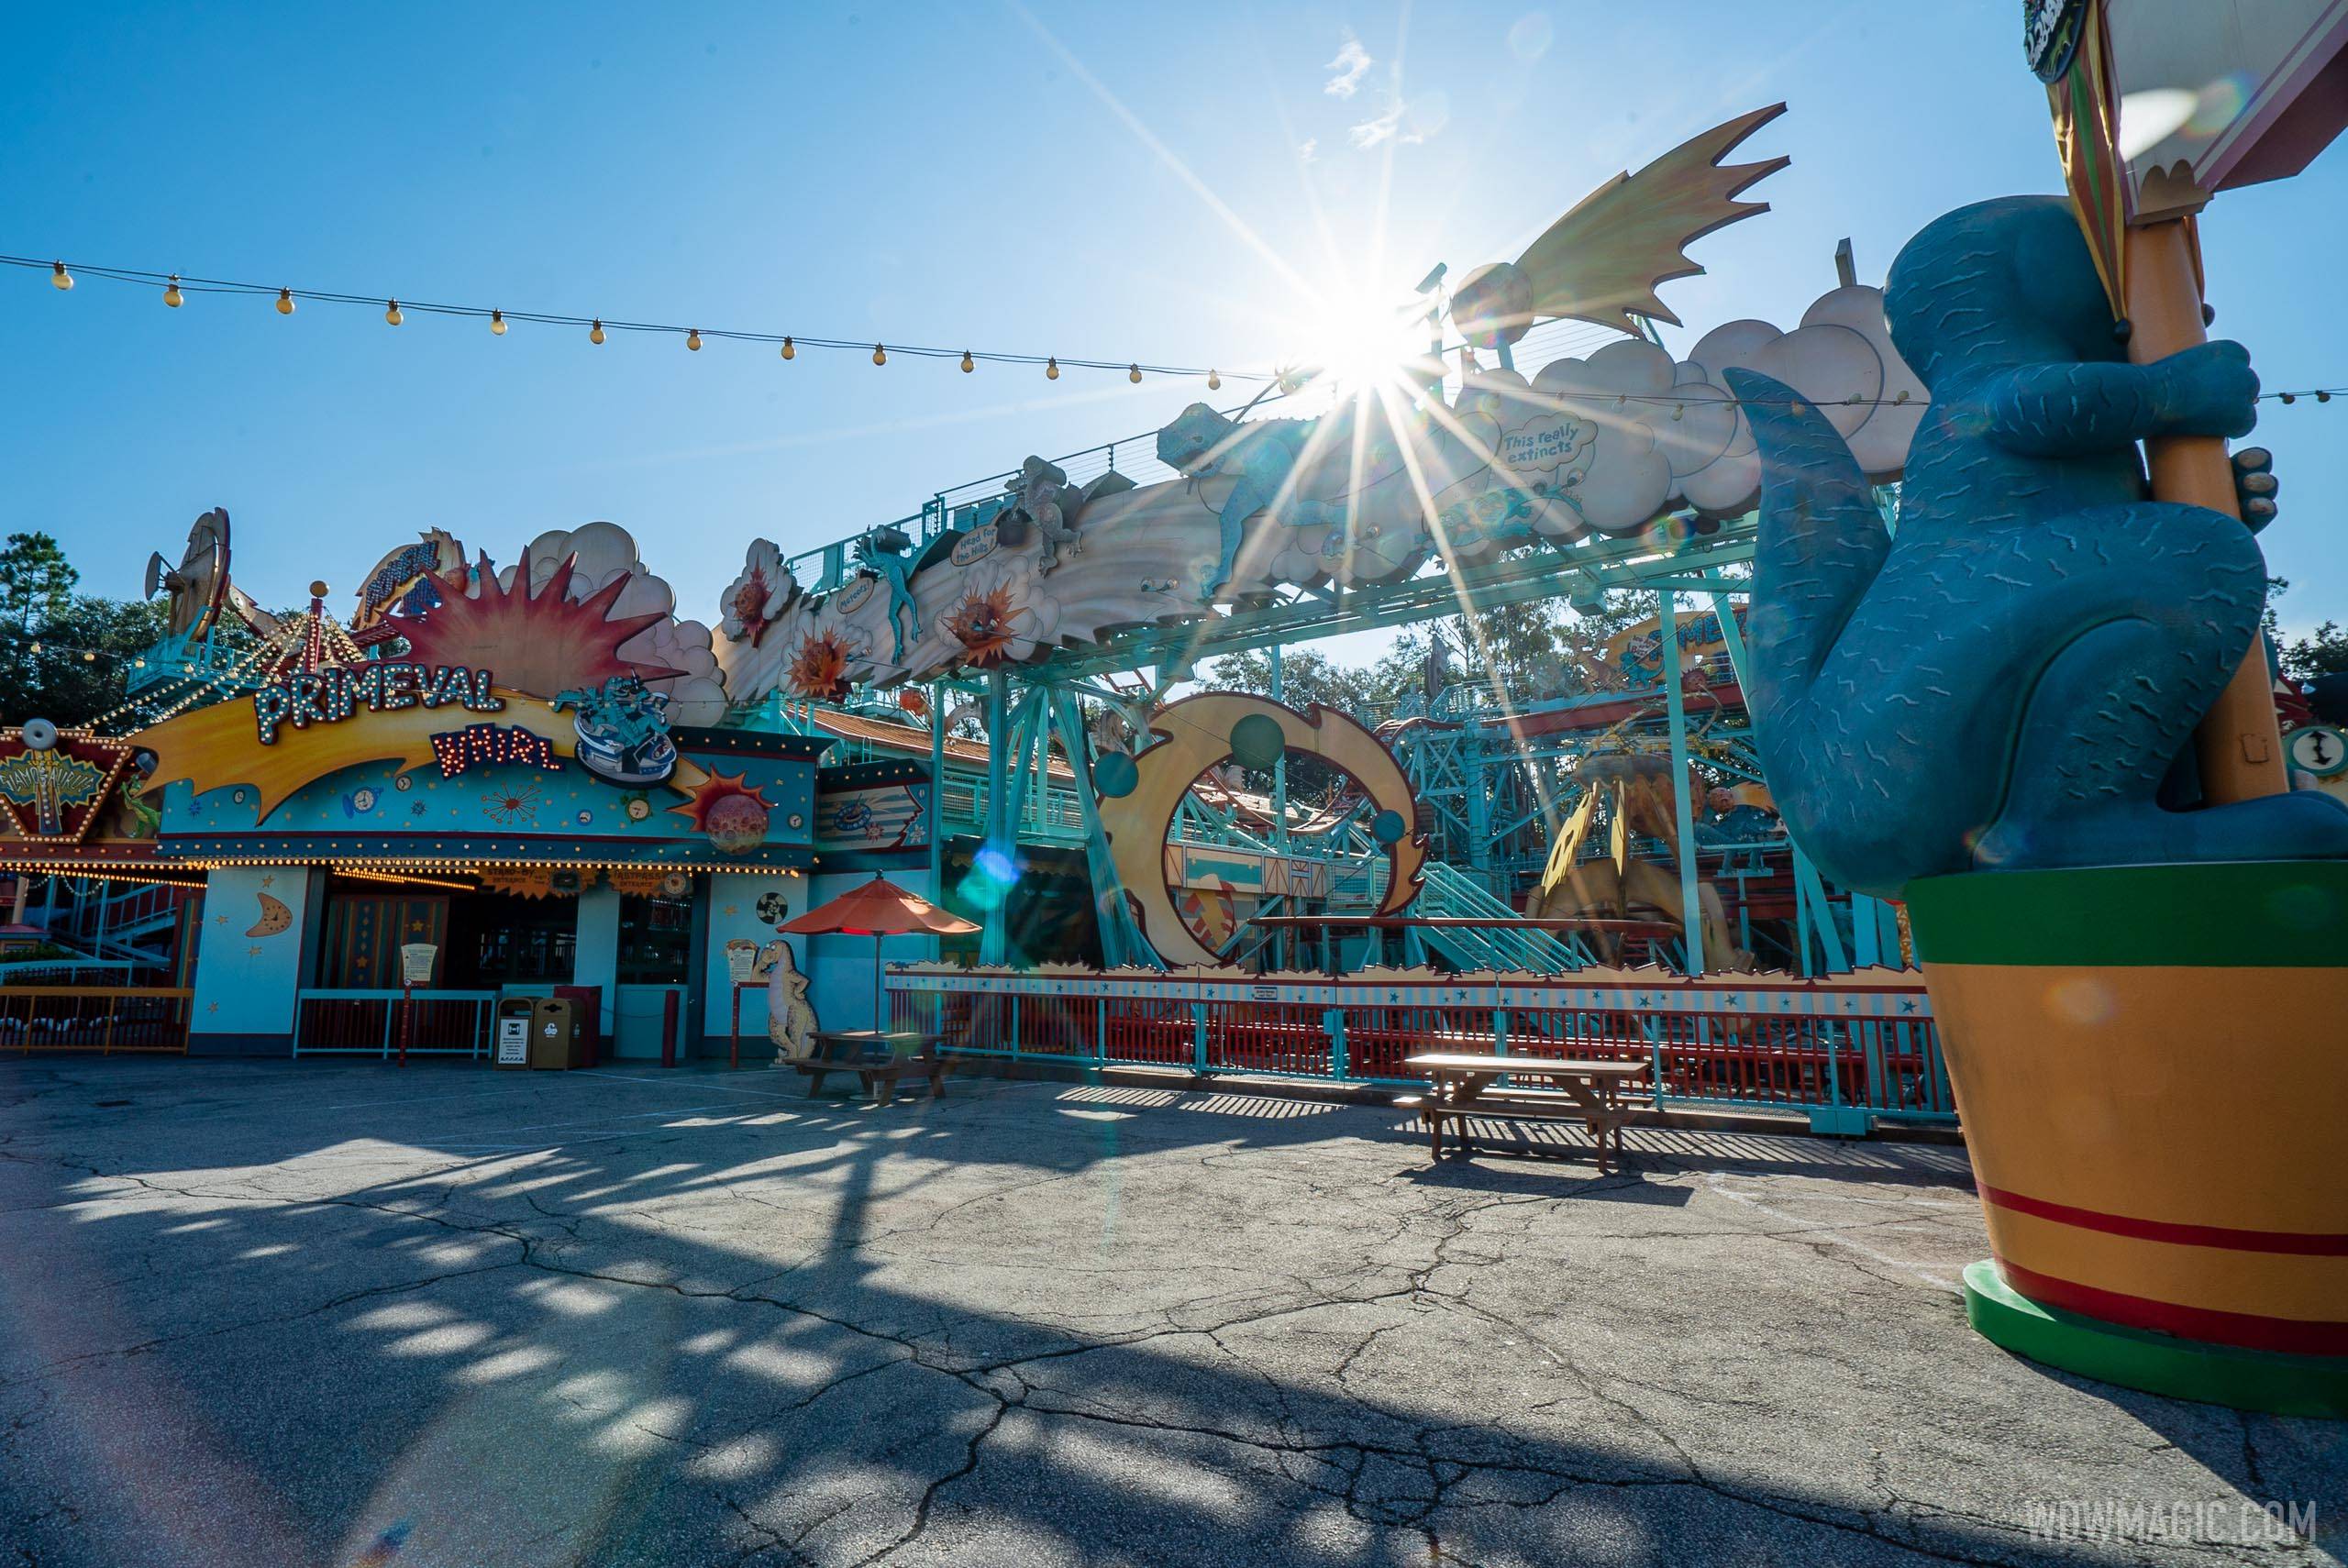 Primeval Whirl closing for lengthy refurbishment in the first quarter of 2011